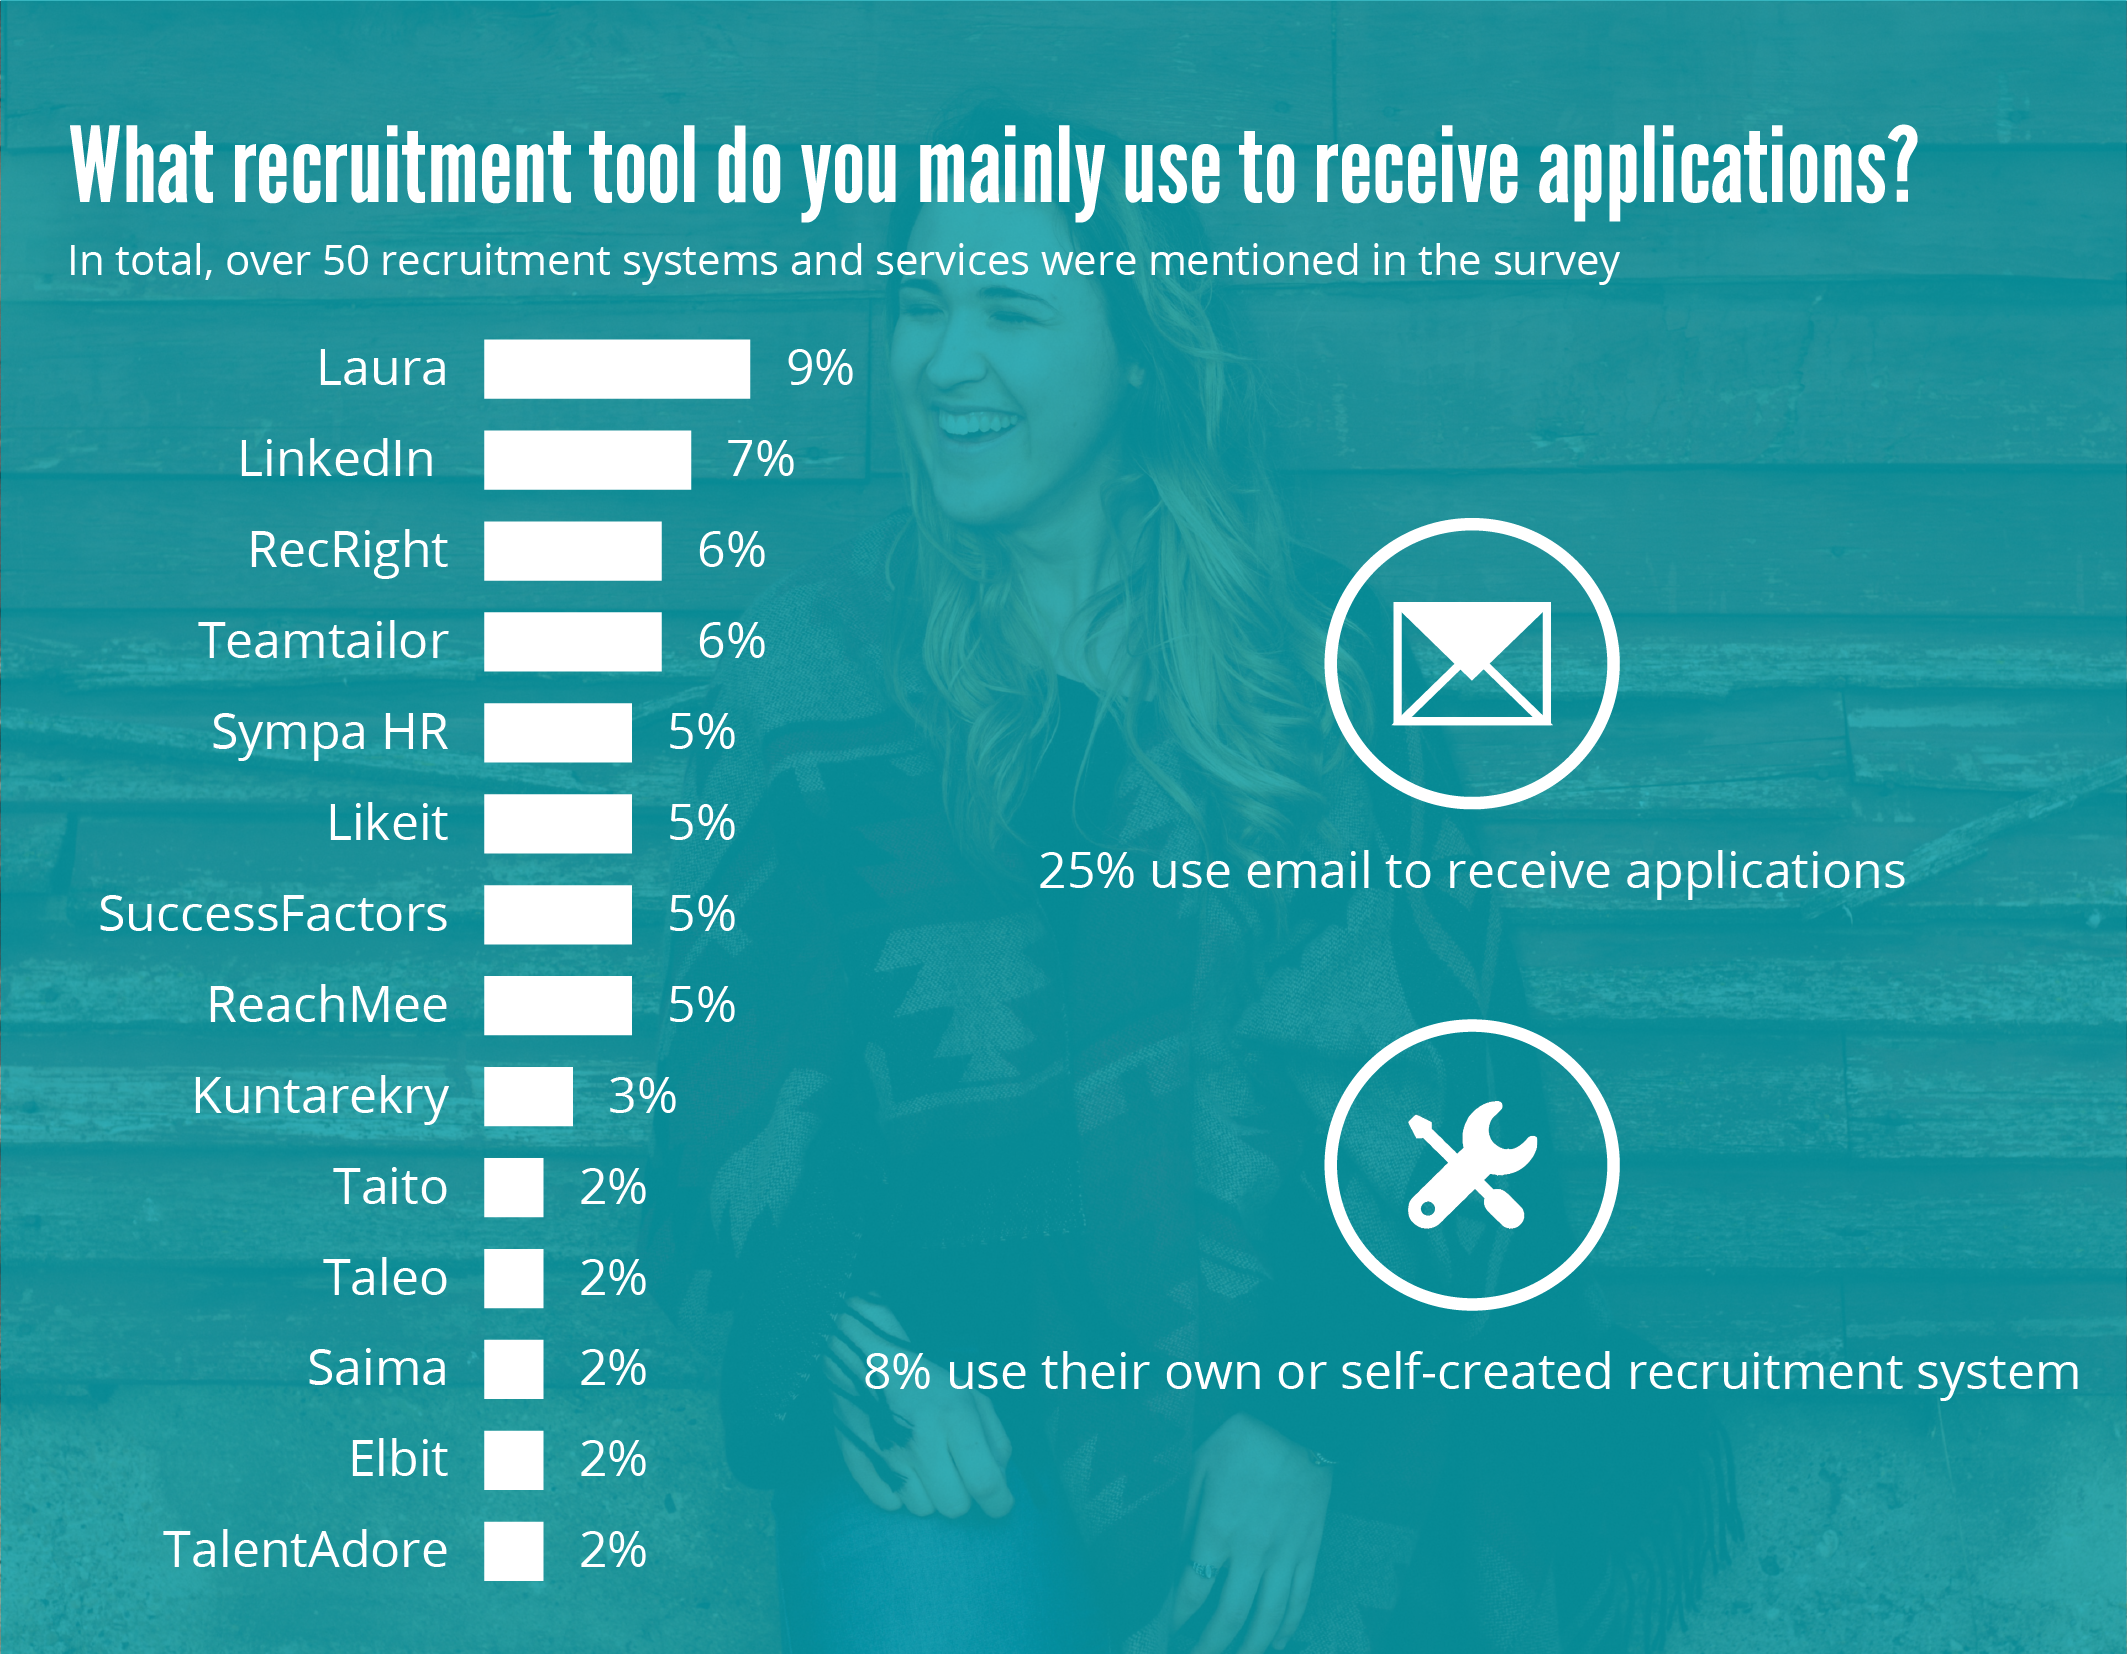 What recruitment tool do you mainly use to receive applications?(source Kansallinen Rekrytointitutkimus 2019)